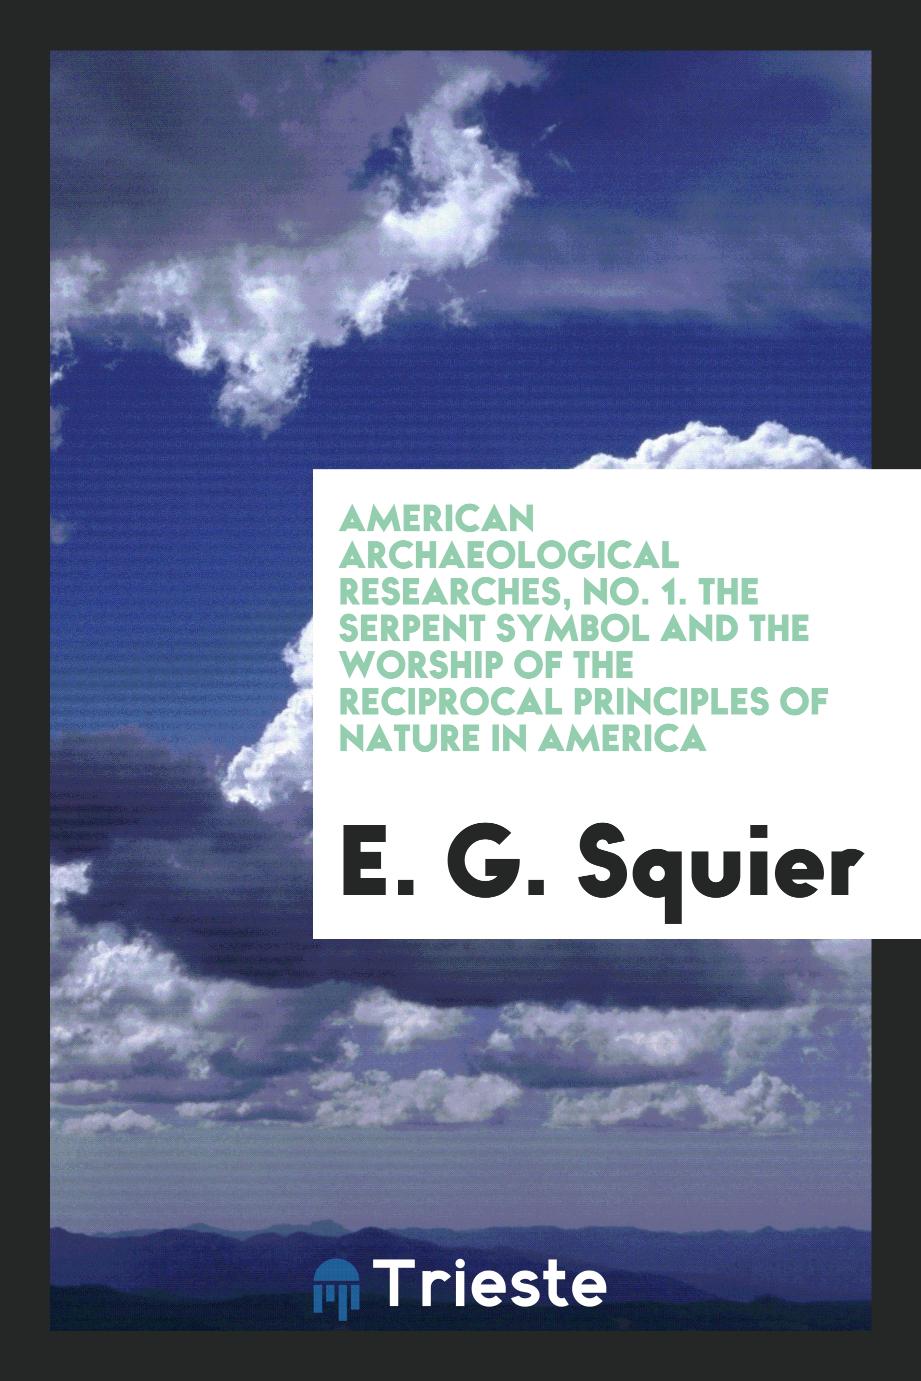 American Archaeological Researches, No. 1. The Serpent Symbol and the Worship of the Reciprocal Principles of Nature in America